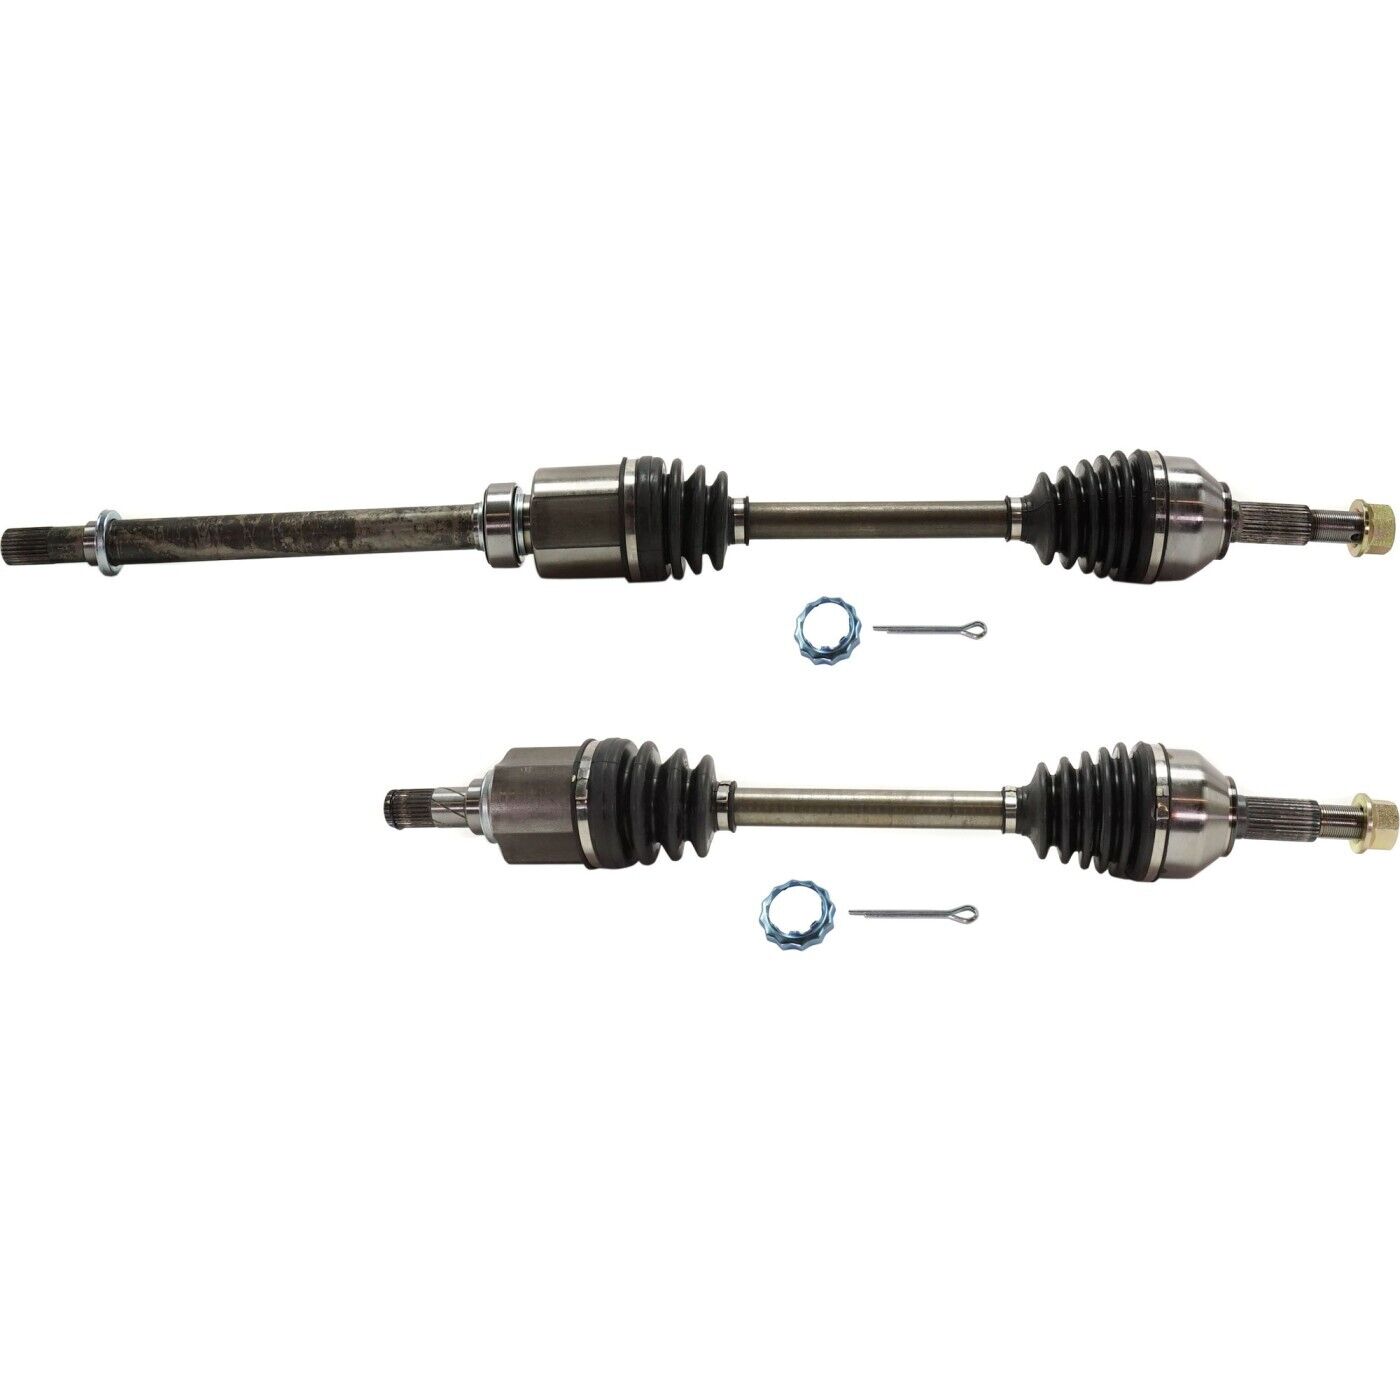 CV Axle For 2007-2012 Nissan Altima Front Left and Right Pair Auto CVT Trans